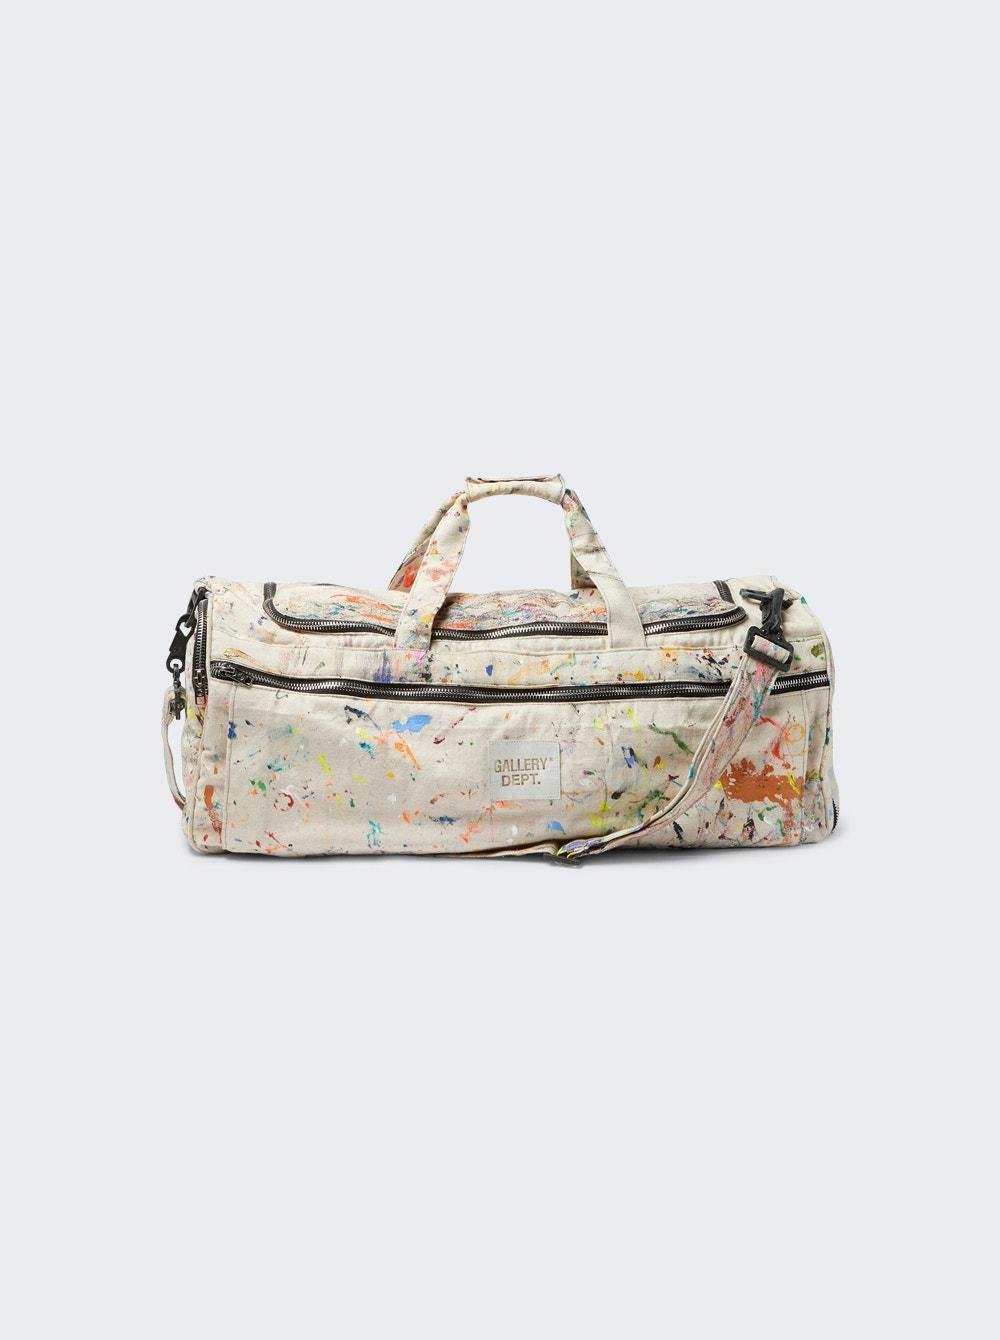 Drop Cloth Duffle Antique White  | The Webster by GALLERY DEPT.